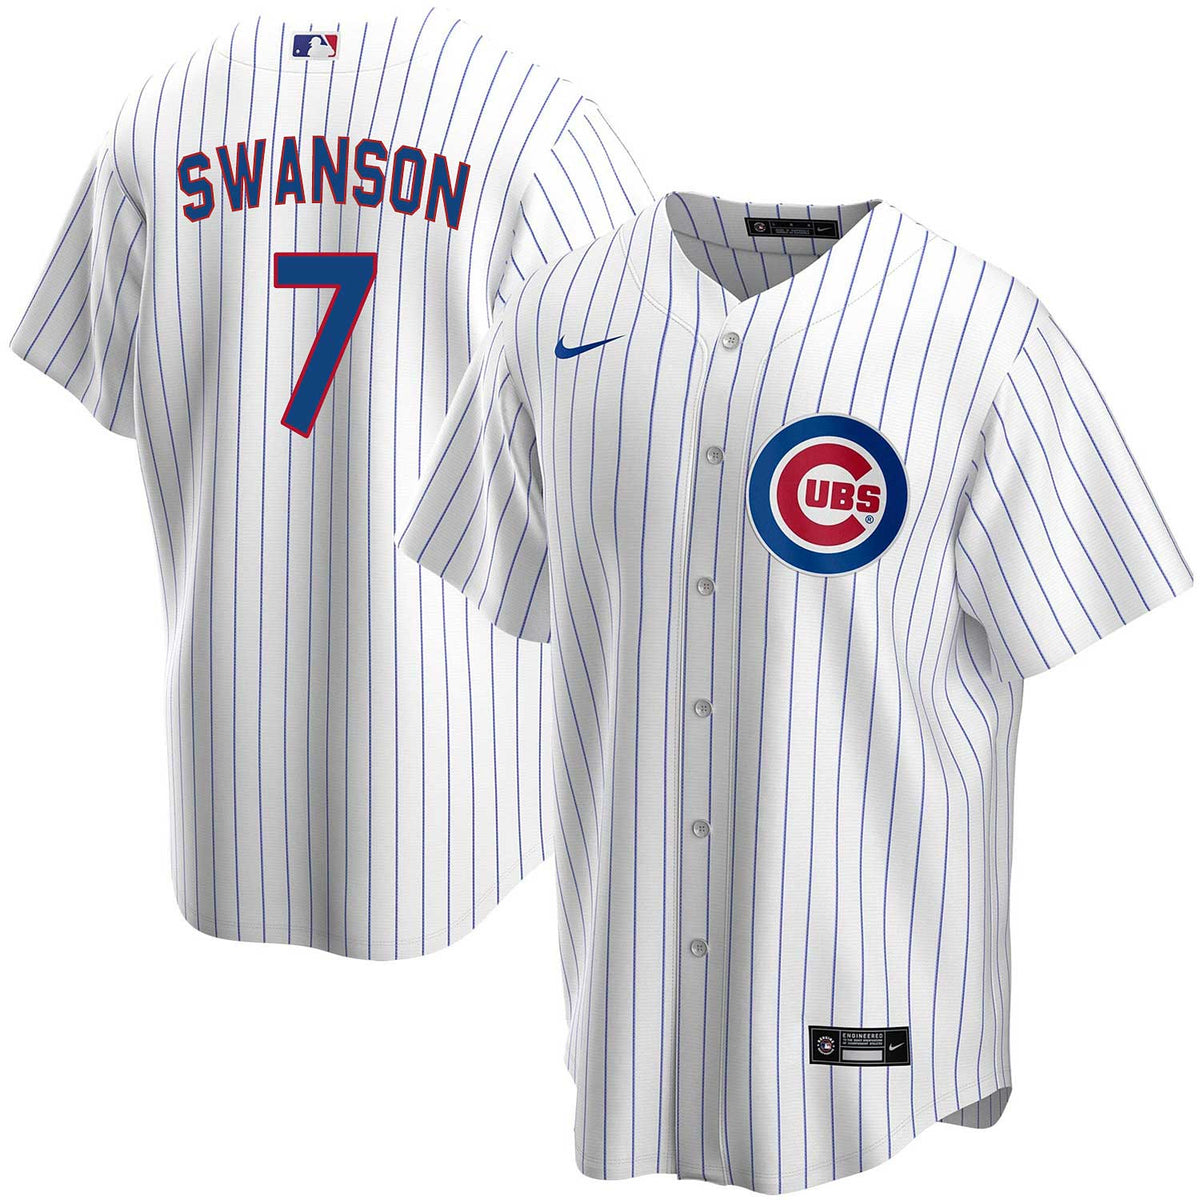 Chicago Cubs #7 Dansby Swanson Jersey Blue/White S-3XL Sizes Free